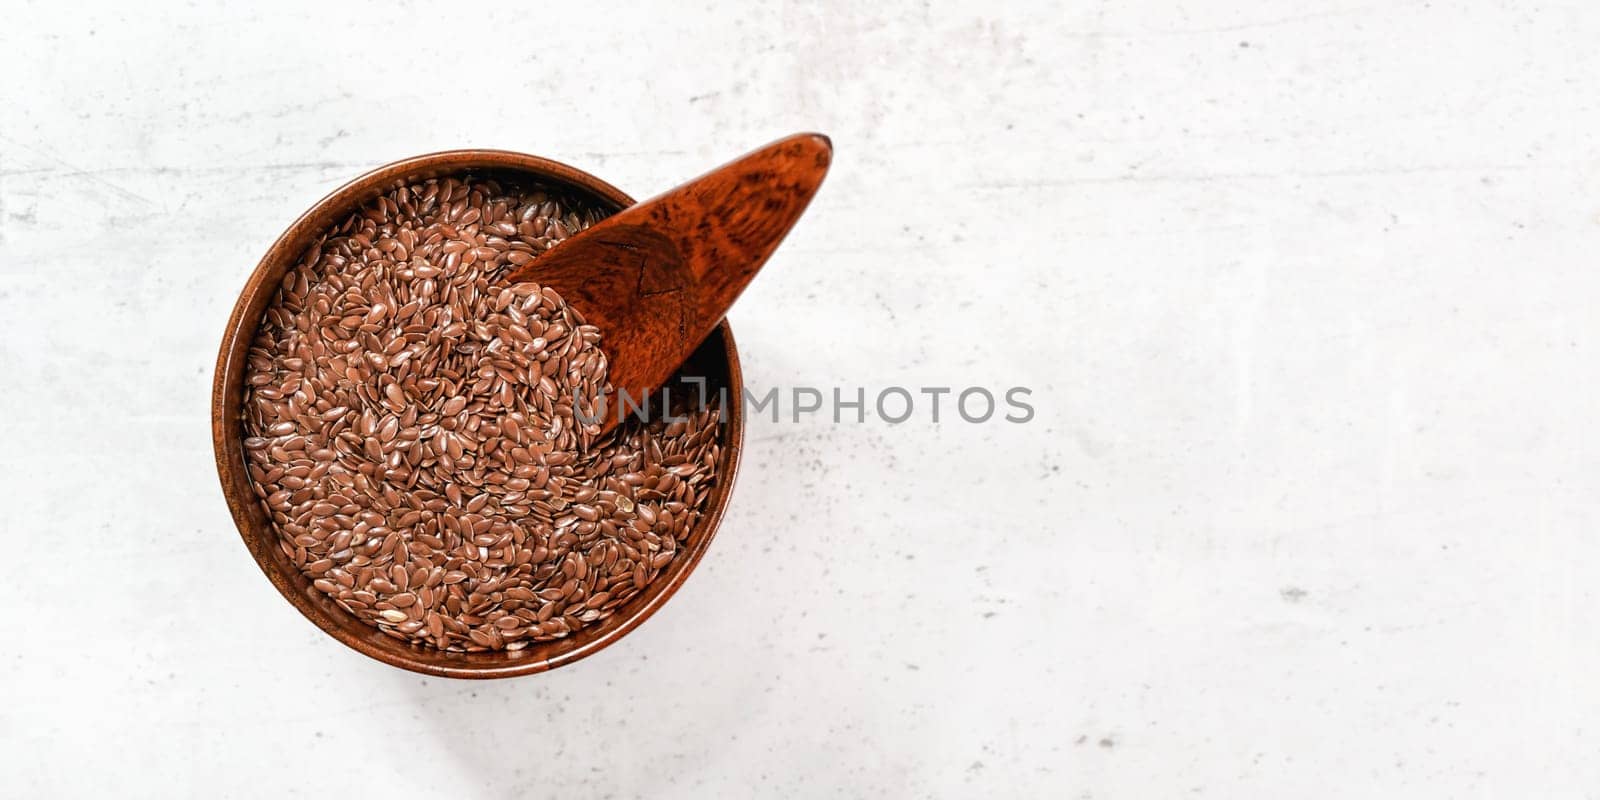 Small wooden bowl full of common flax linseed - Linum usitatissimum - little scoop inside, on white stone like desk, view from above, space for text right side by Ivanko